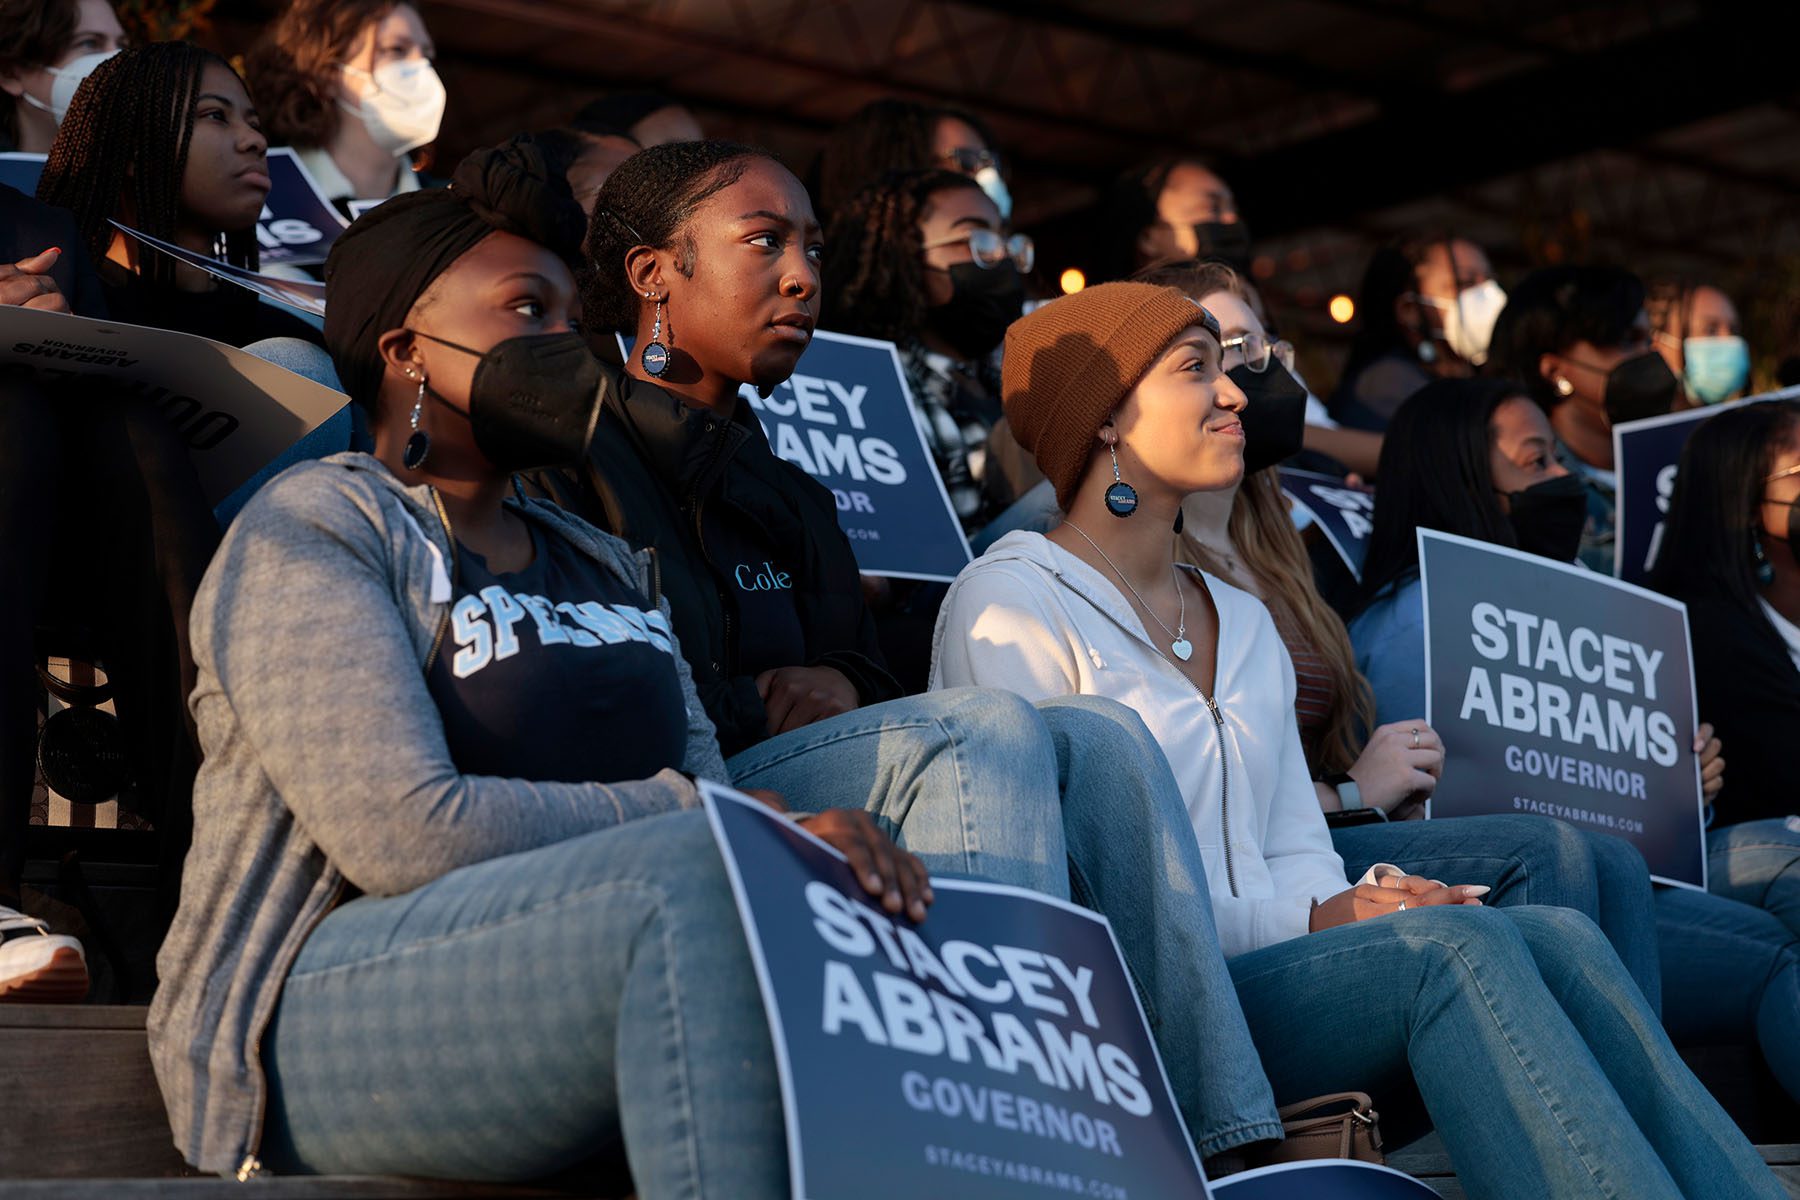 Supporters listen and hold signs in support of Stacey Abrams during a campaign rally.